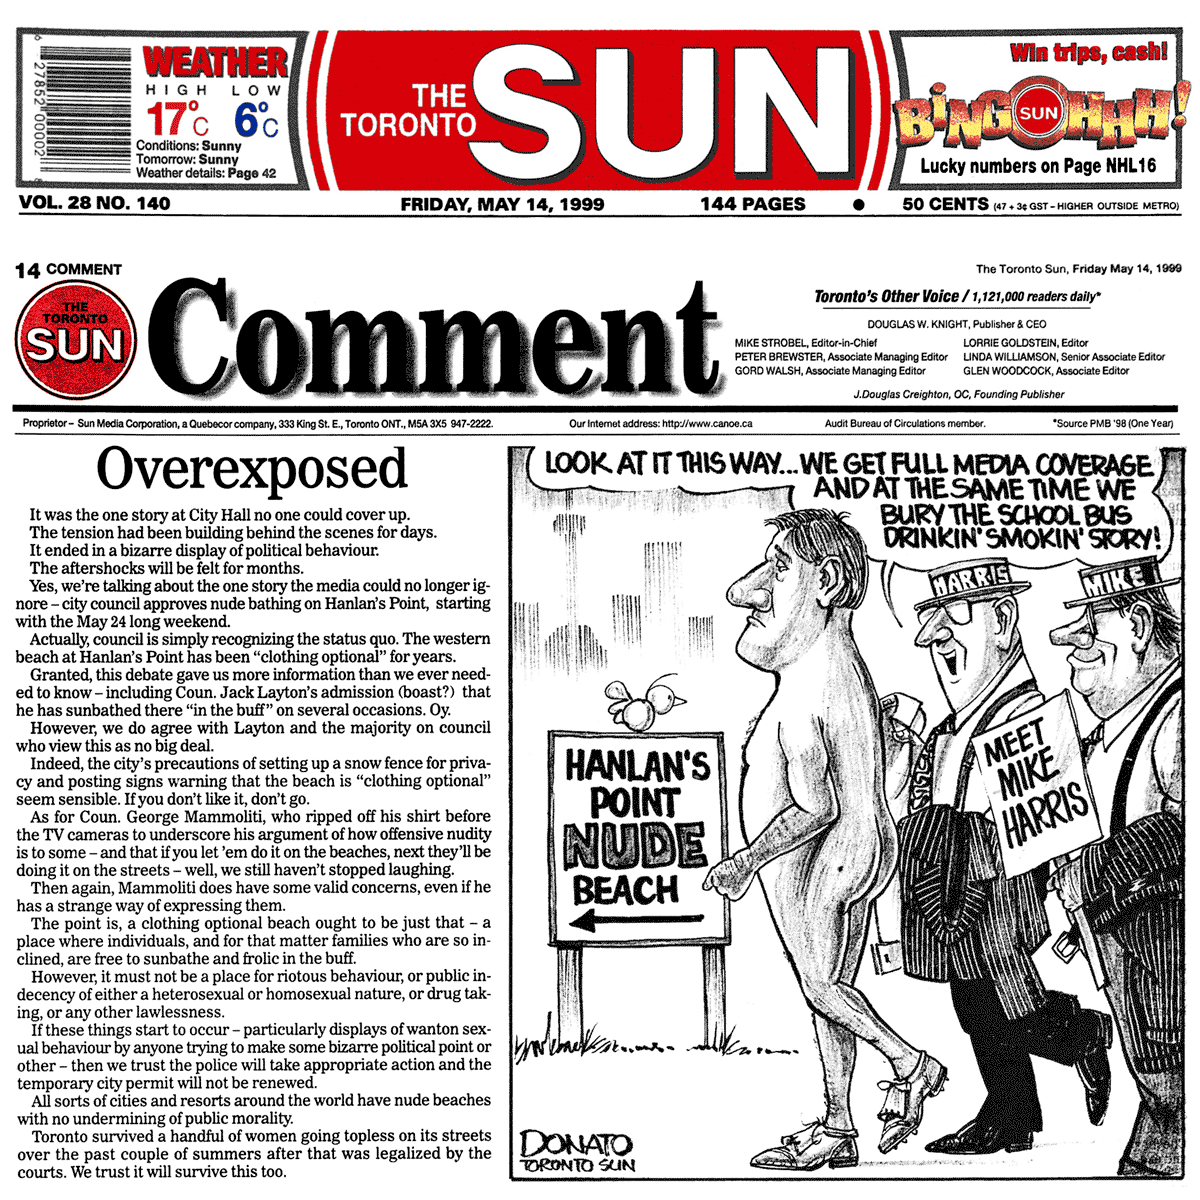 Toronto Sun 1999-05-14 p14 - Lead Editorial favours creating CO-zone at Hanlan's Point